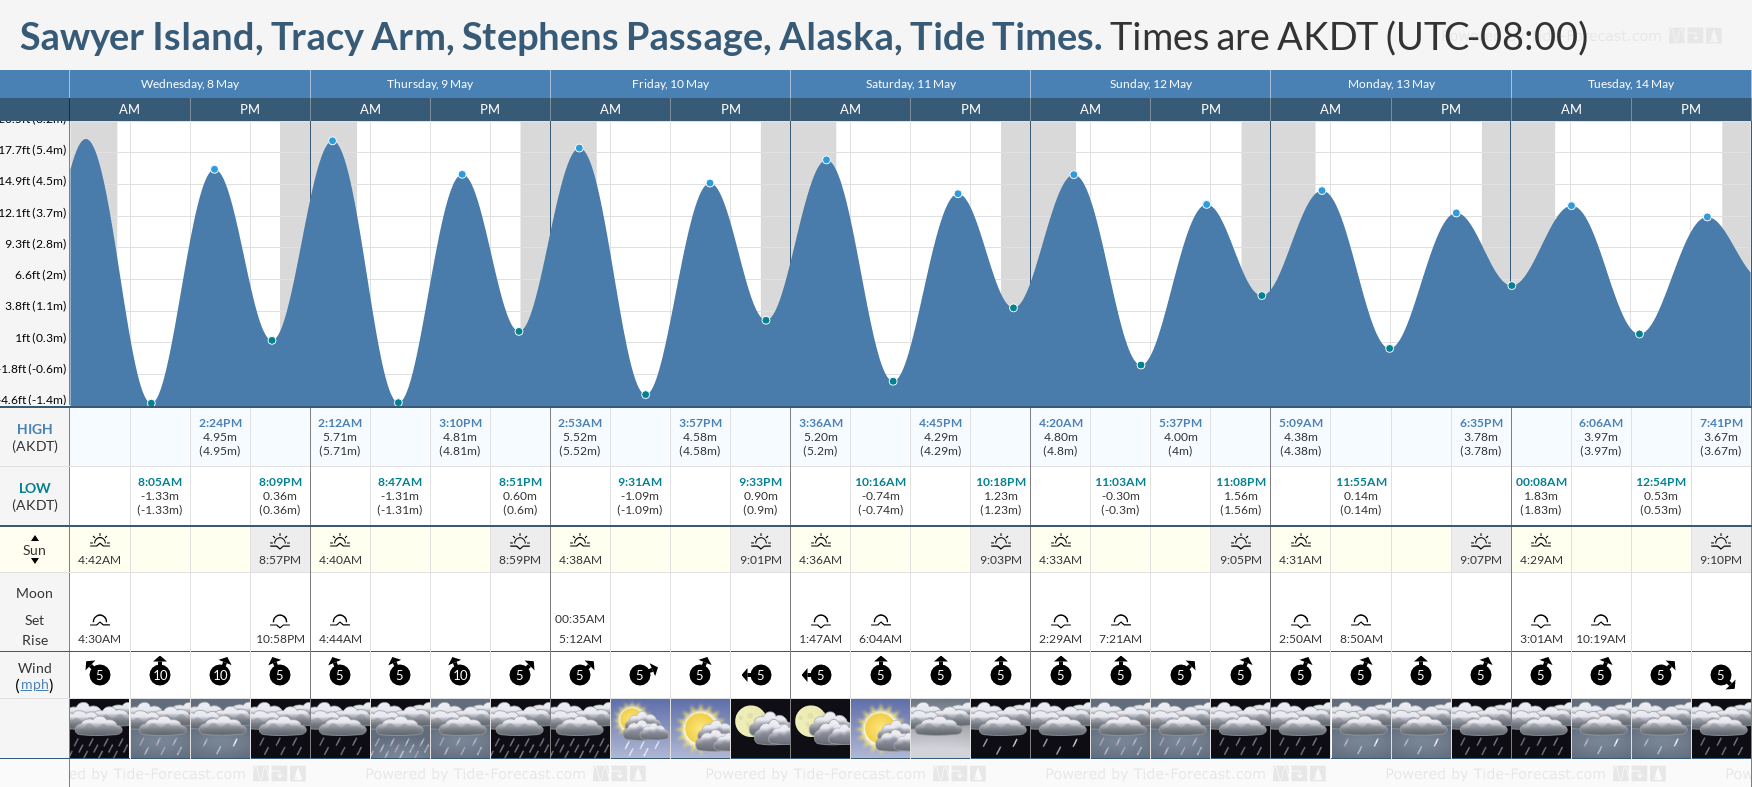 Sawyer Island, Tracy Arm, Stephens Passage, Alaska Tide Chart including high and low tide tide times for the next 7 days